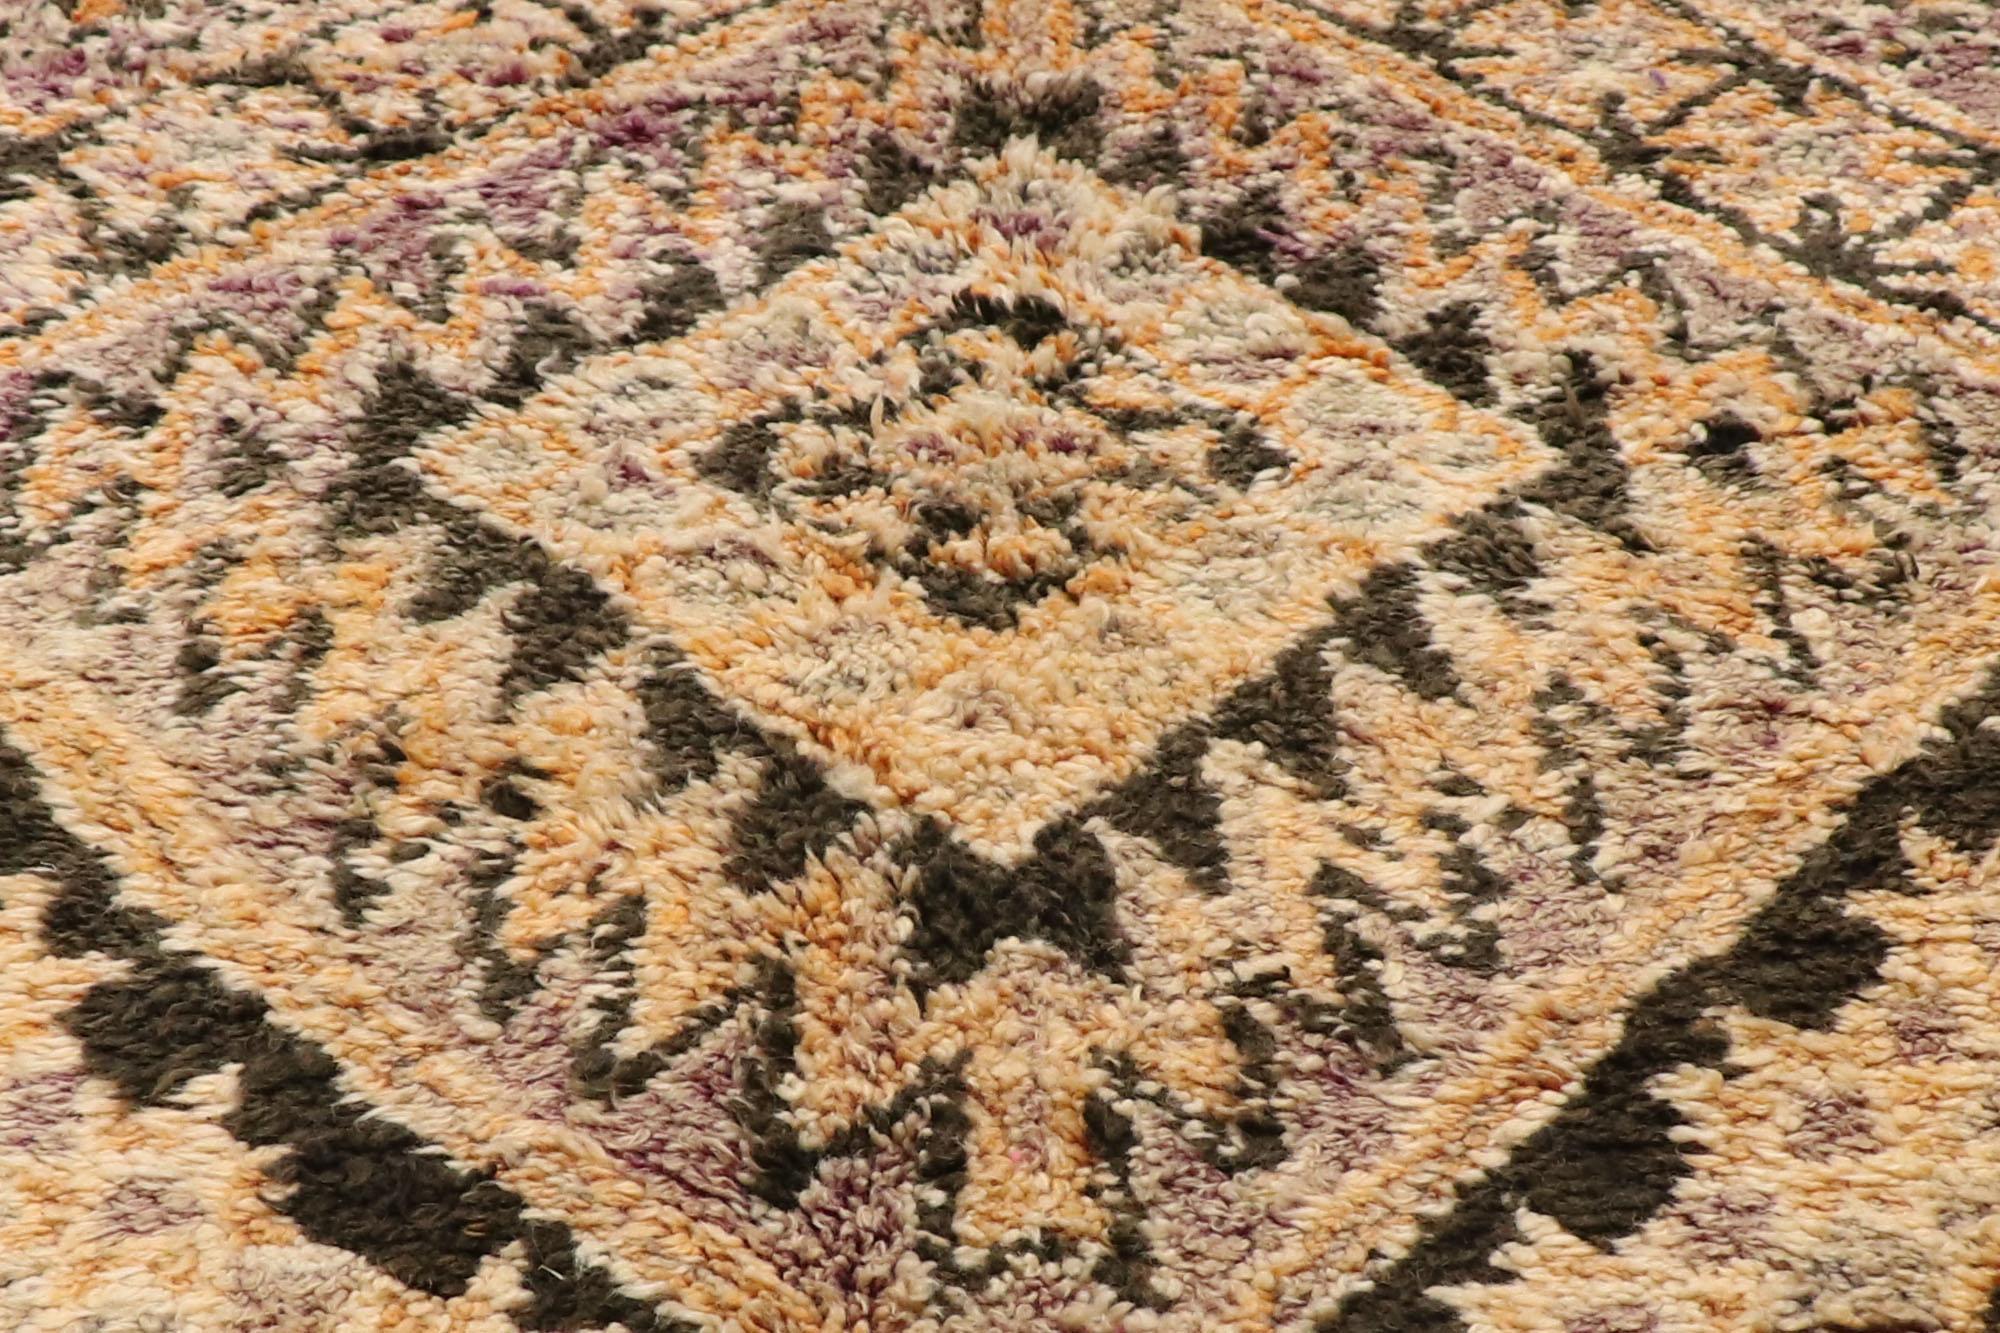 Hand-Knotted Vintage Brown Beni MGuild Moroccan Rug, Earthy Boho Chic Meets Midcentury For Sale